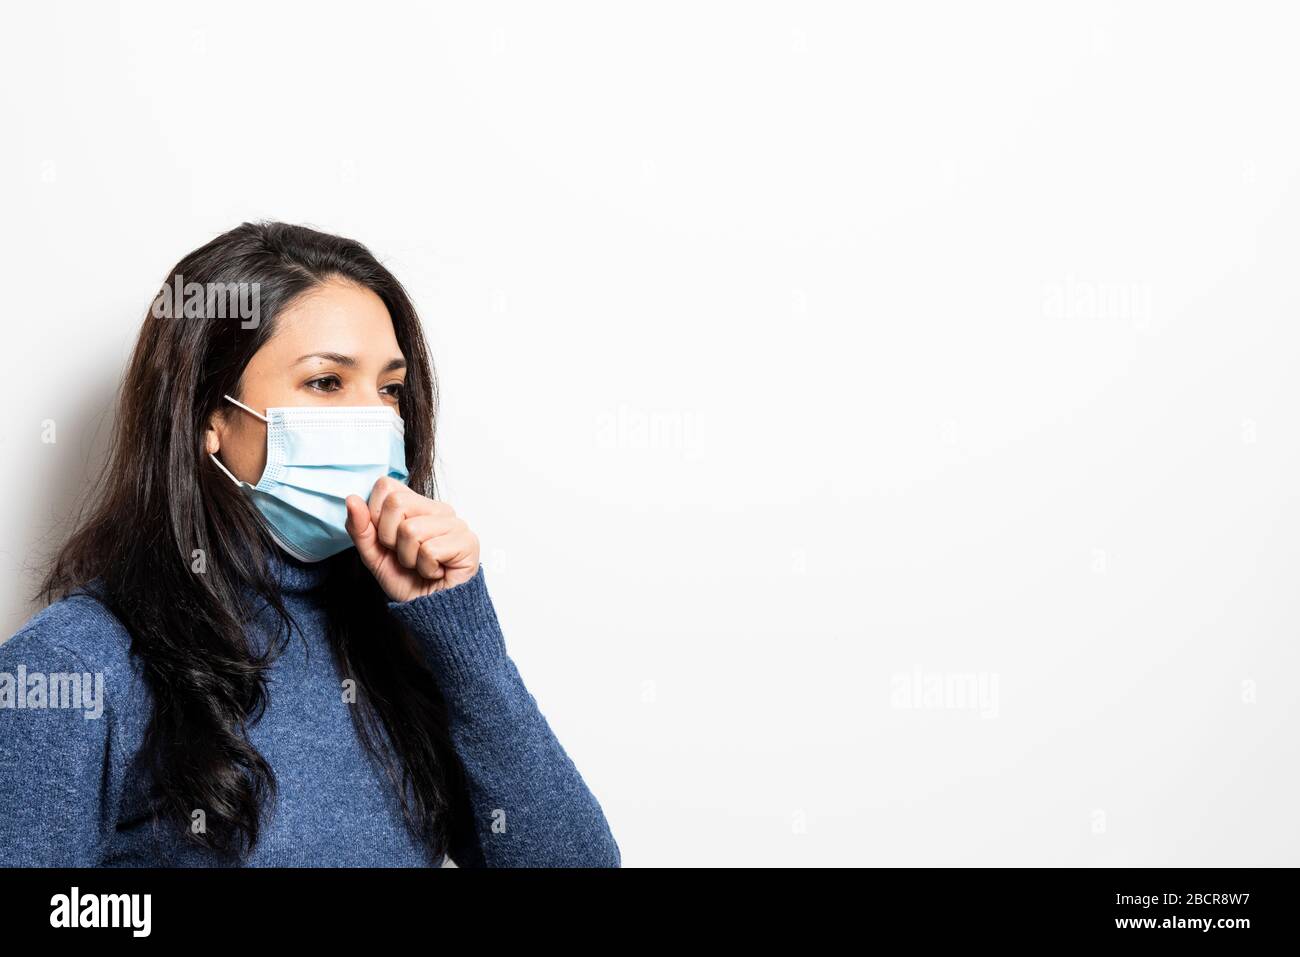 Young woman with mask coughing on a white background. Stock Photo